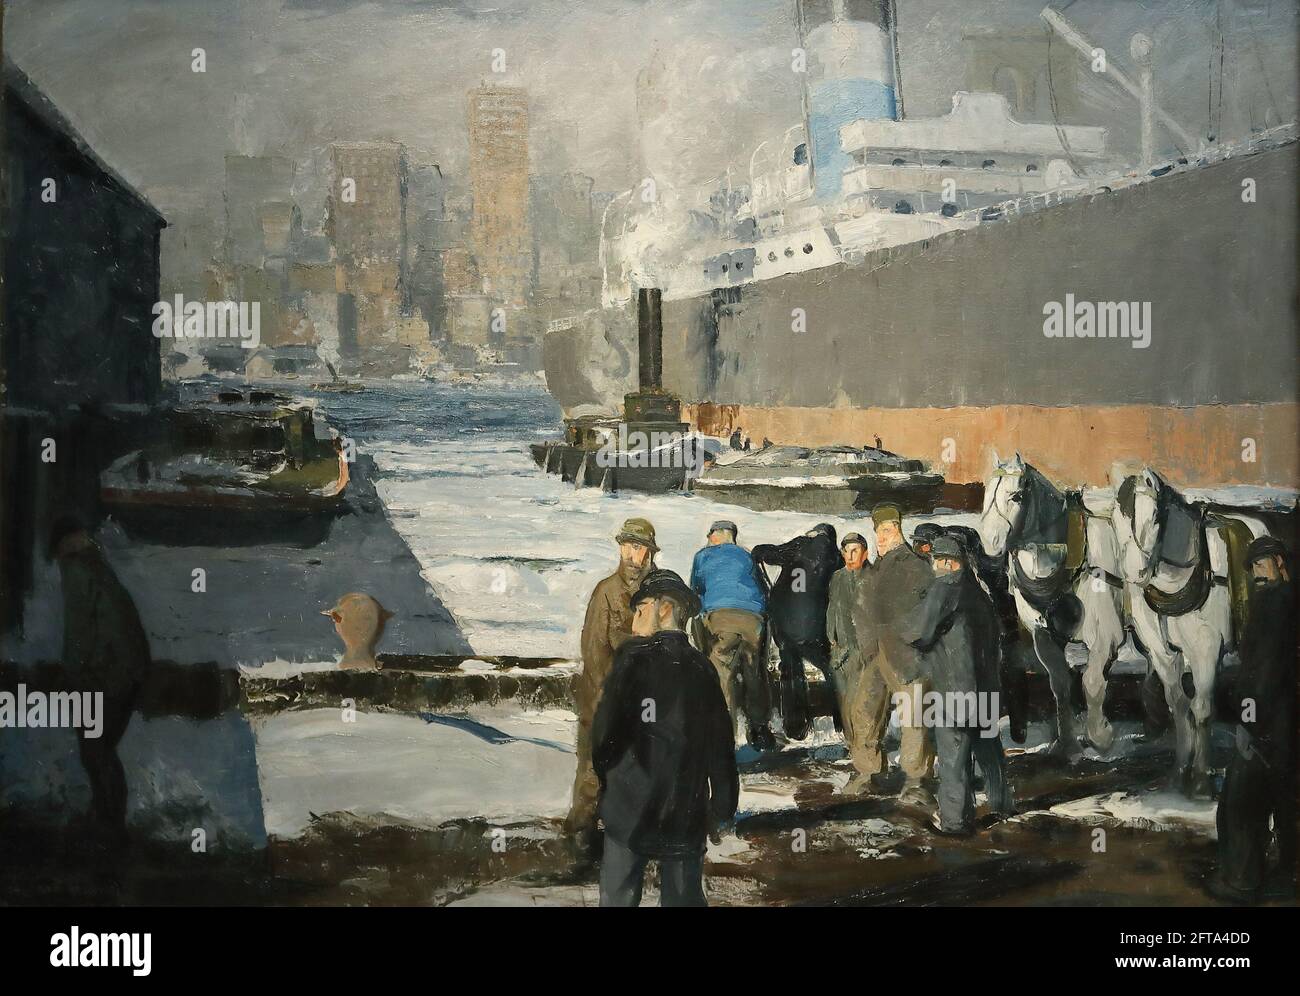 Men of the Docks by American realist painter George Bellows at the National Gallery, London, UK Stock Photo